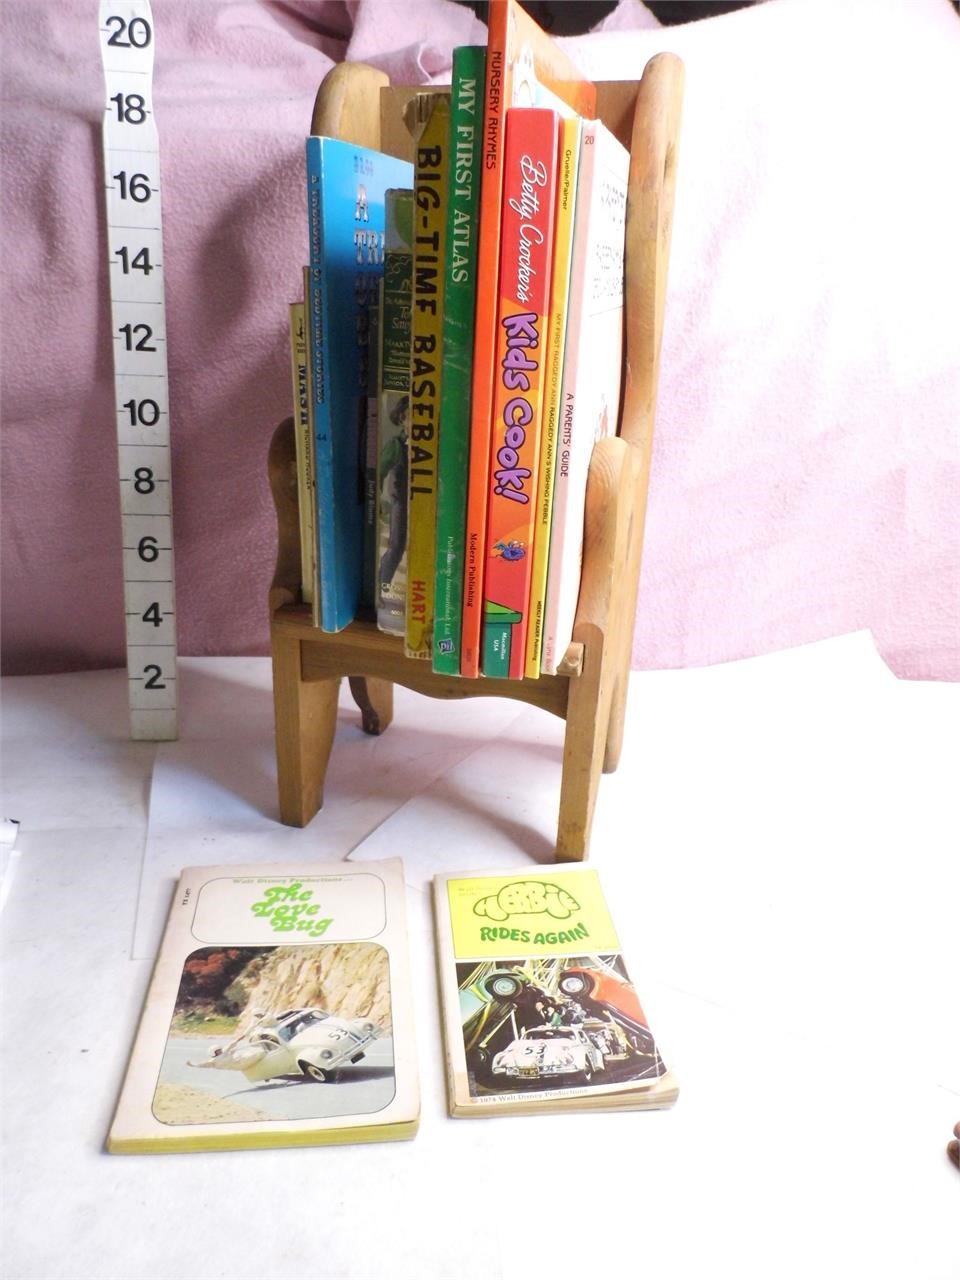 Wood Doll Chair with Lot of Childrens' Books